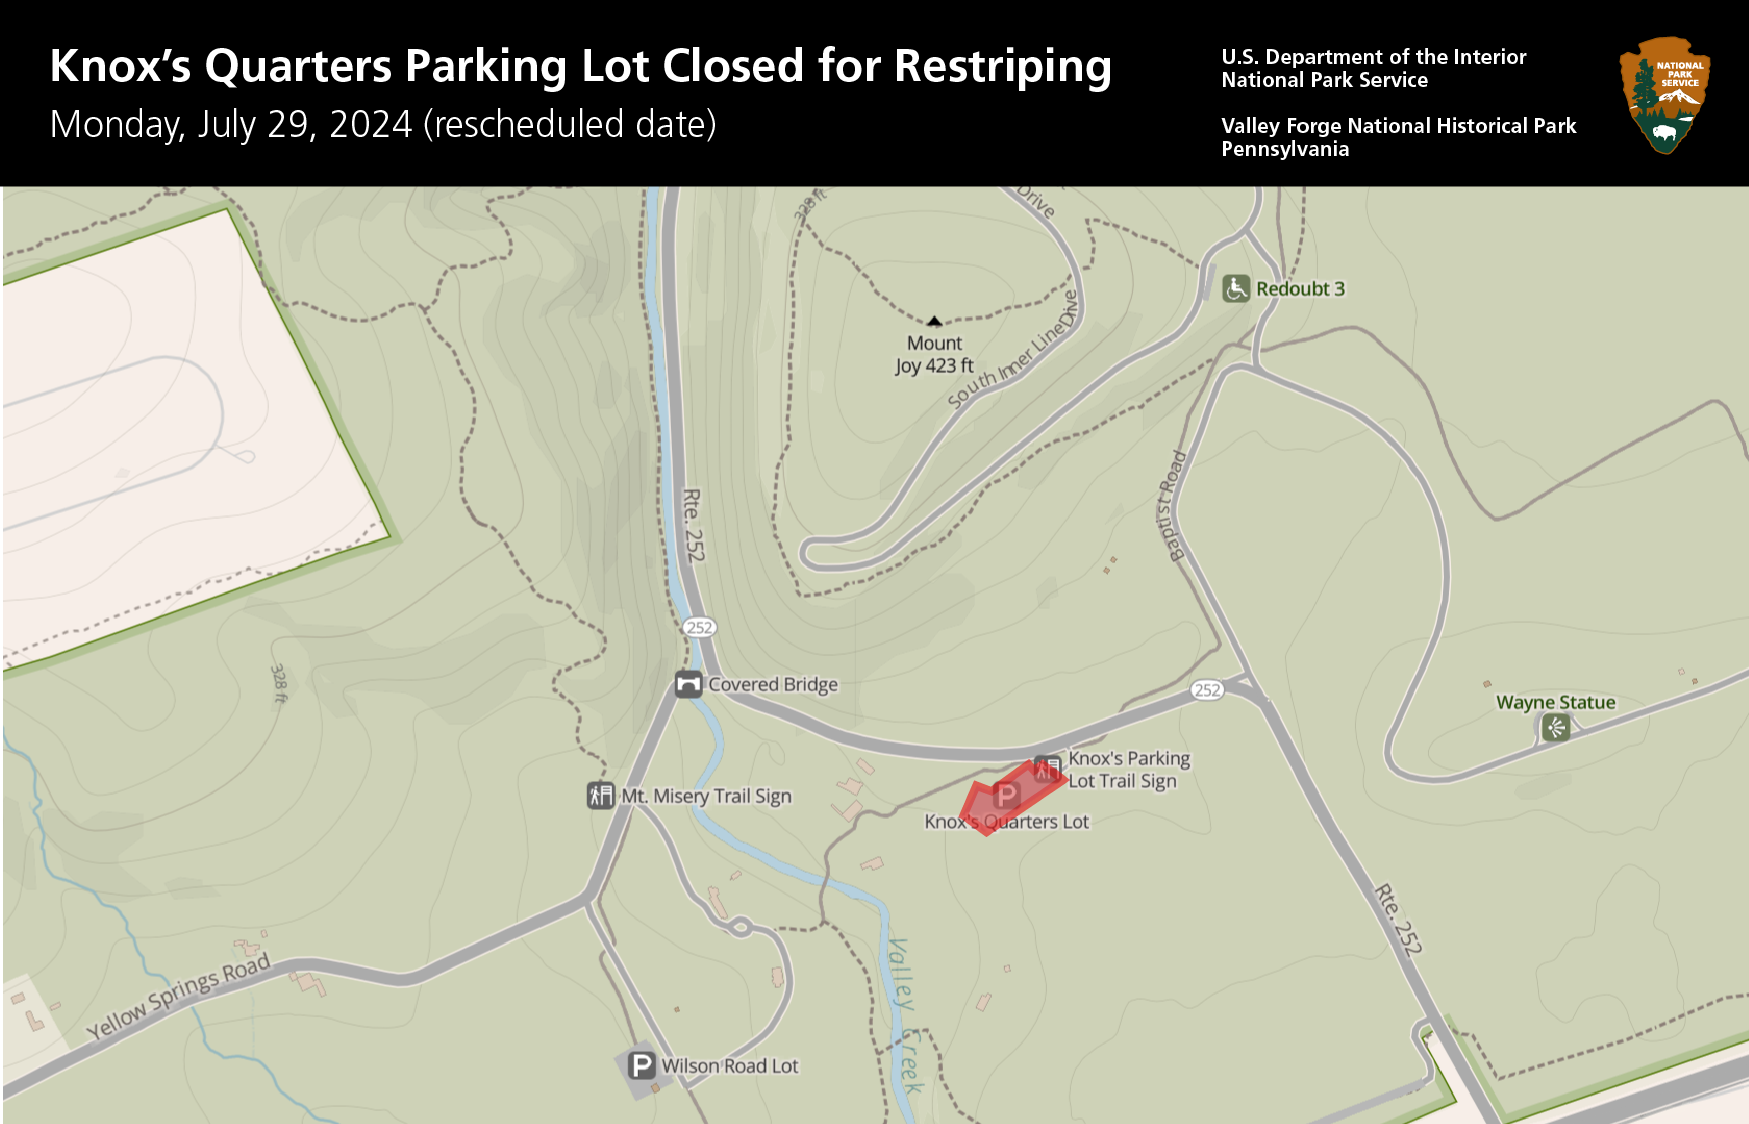 a map highlighting the Knox's Quarters parking lot along Rte. 252 near Valley Creek, the Covered Bridge, Mt. Misery Trail and the Wilson Rd. parking lot.